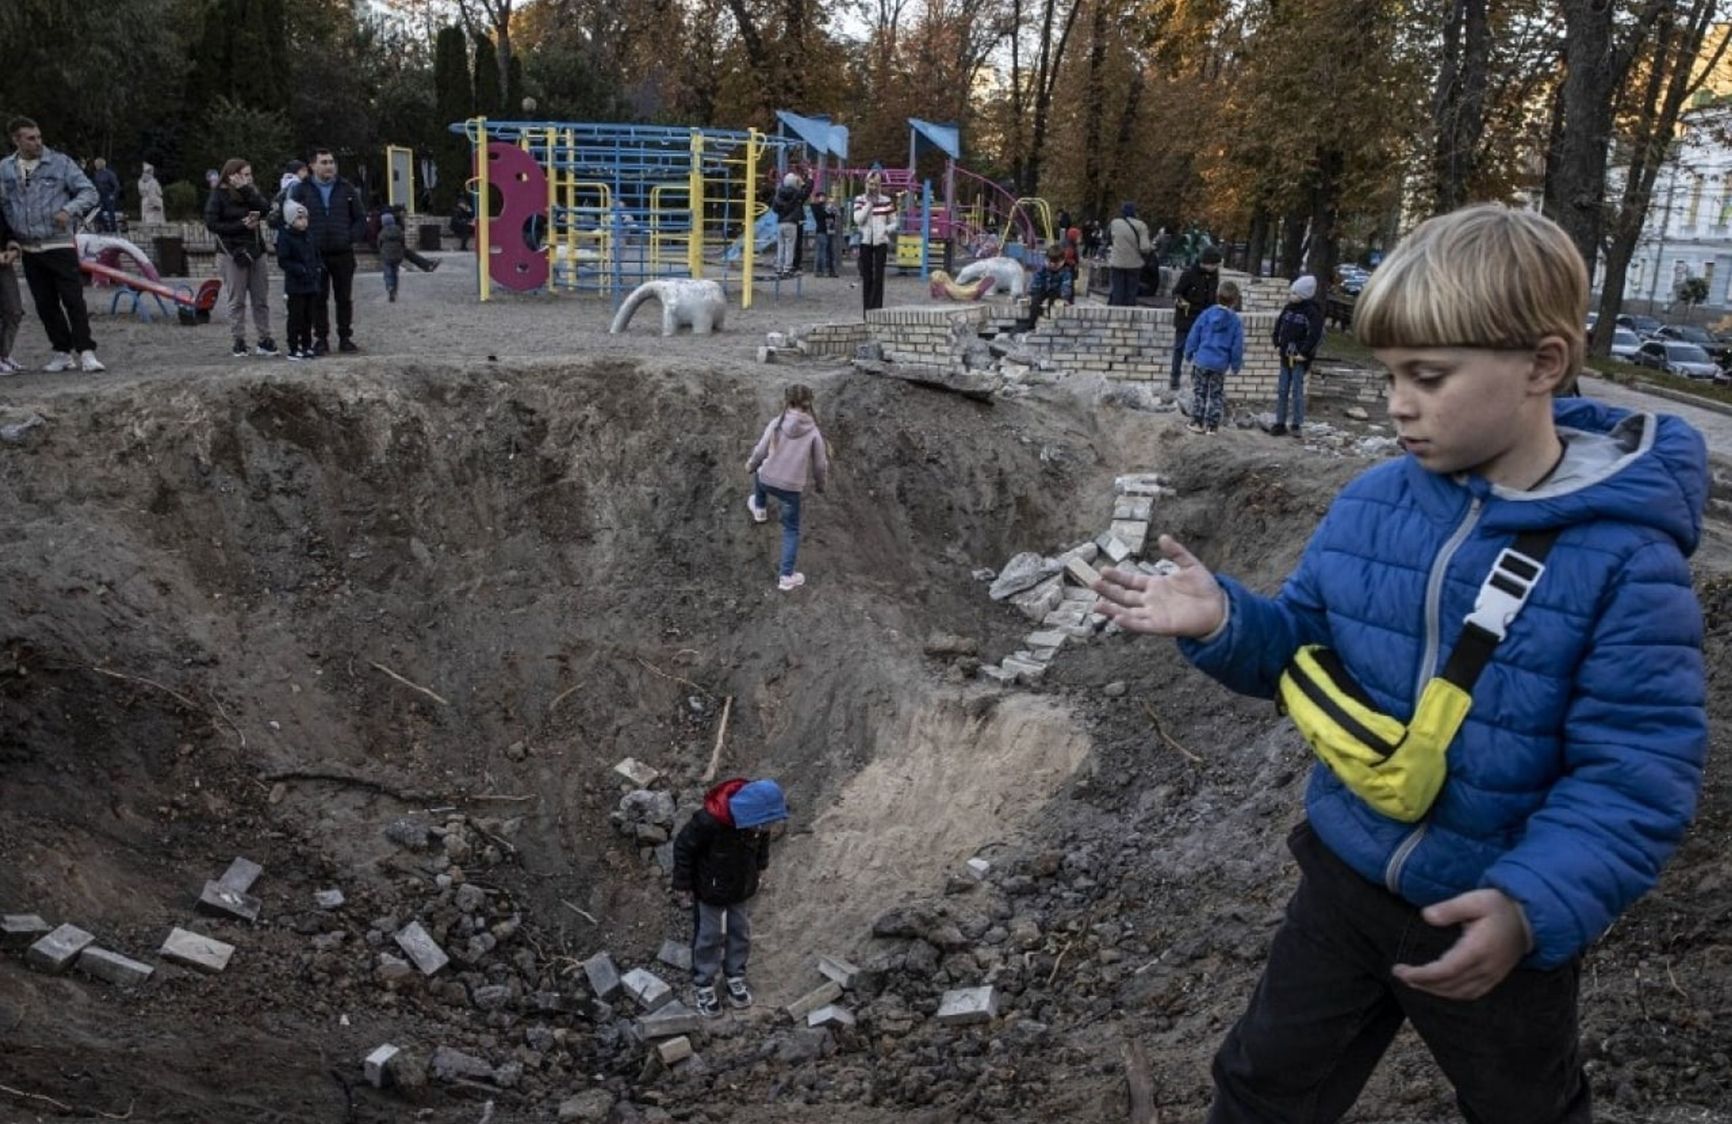 One of the "high-precision" Russian missiles hit a children's playground on October 11